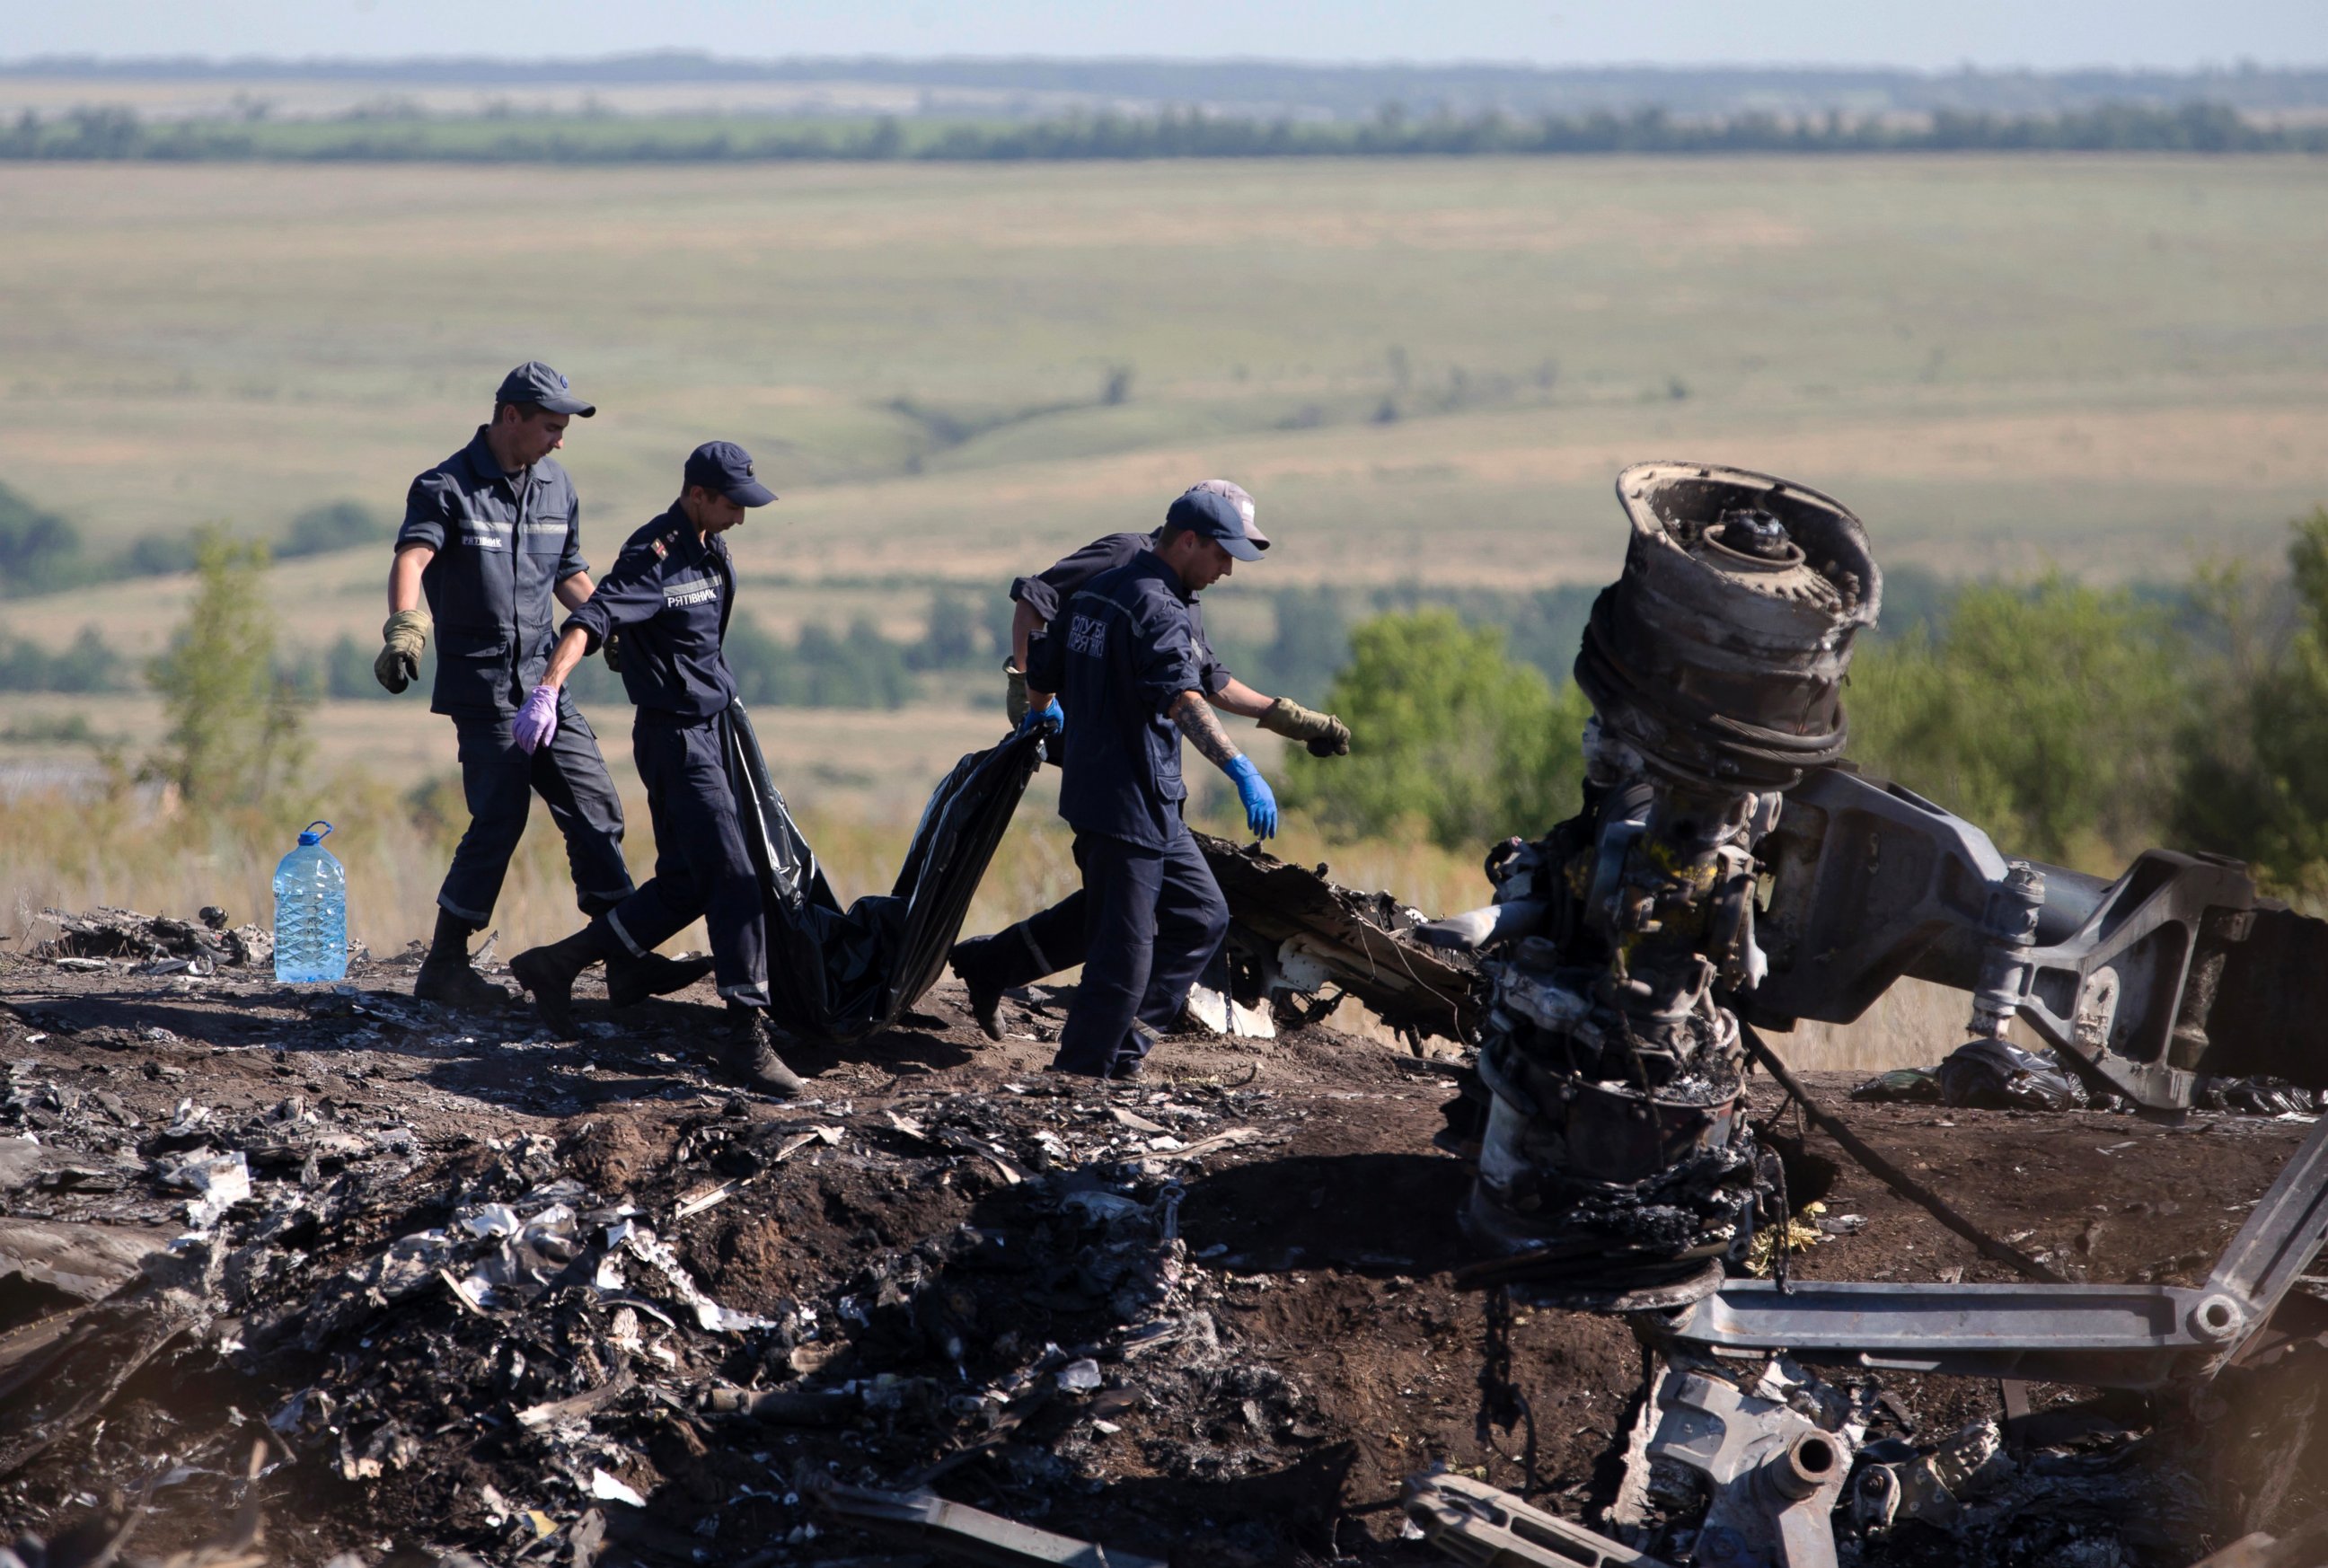 PHOTO: Ukrainian Emergency workers carry a victim's body in a plastic bag at the crash site of Malaysia Airlines Flight 17 near the village of Hrabove, Donetsk region, eastern Ukraine, July 21, 2014. 